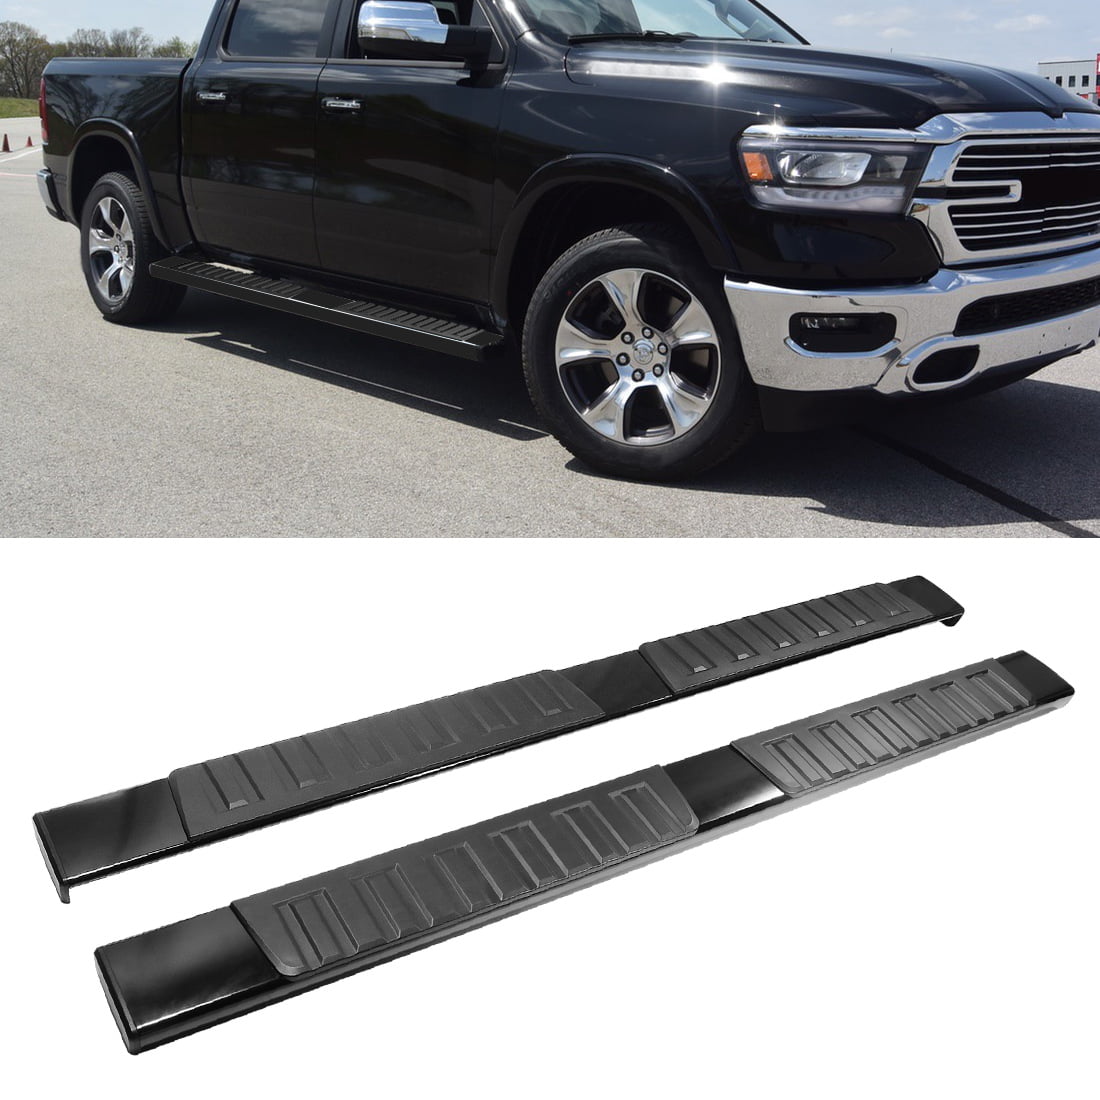 Fits 09-18 Dodge Ram Crew Cab 5" Oval Chrome Side Step Nerf Bars Running Boards 